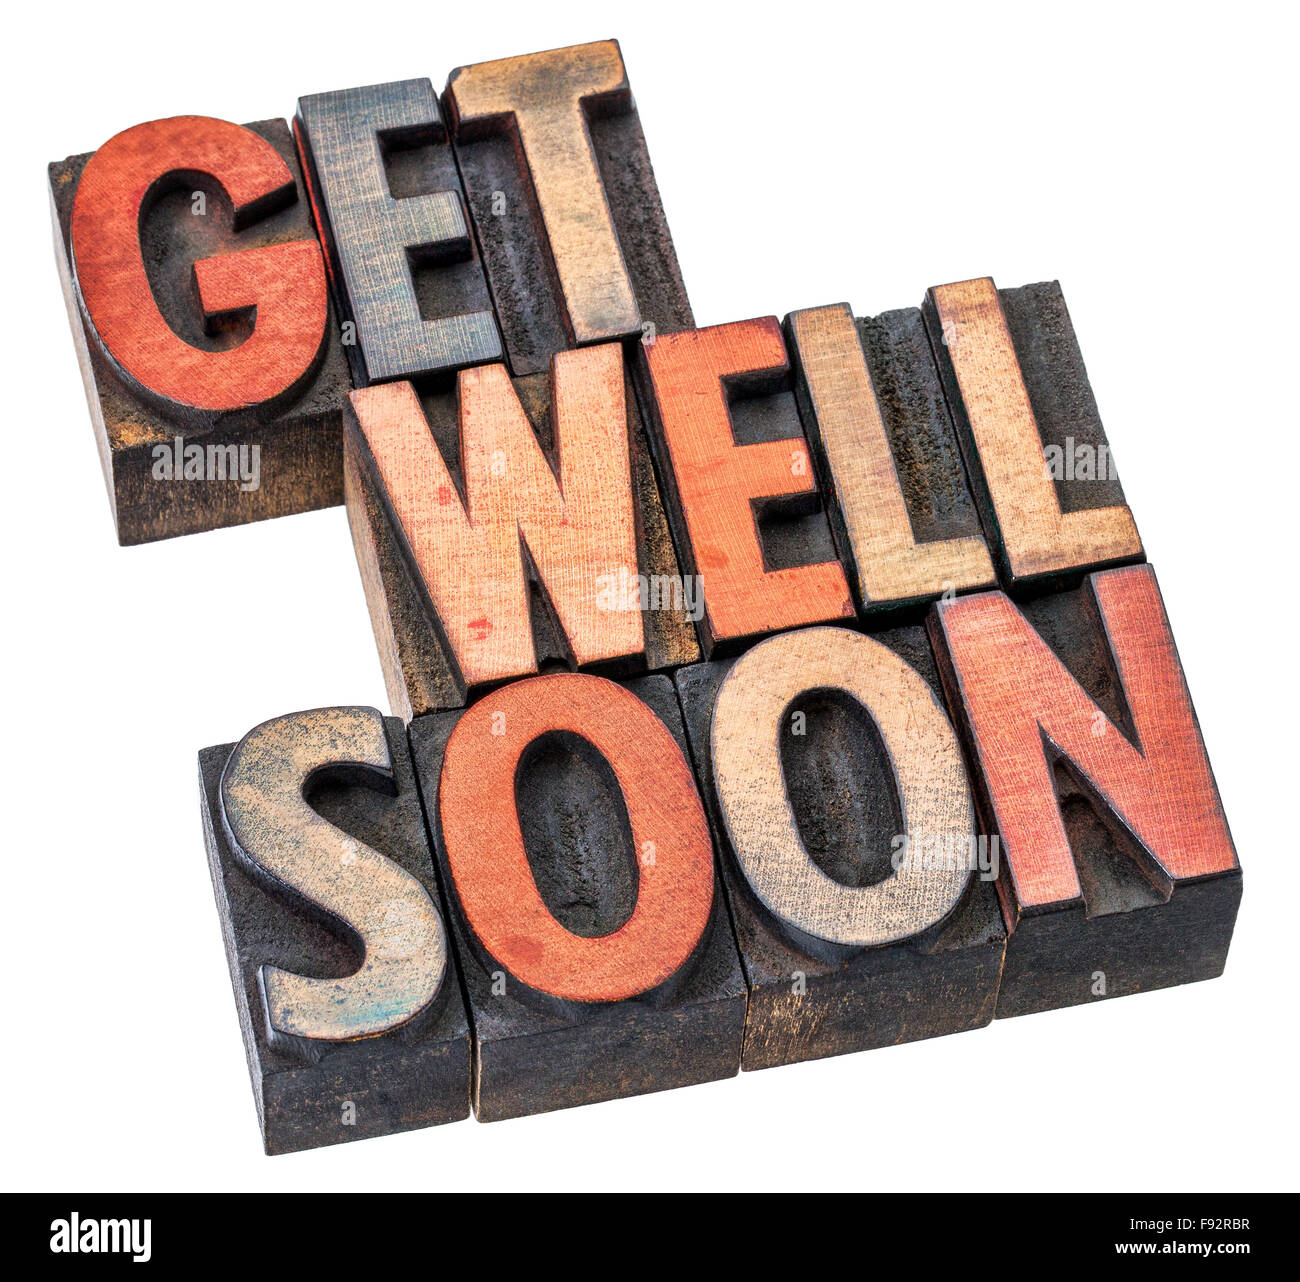 Get well soon wishes in letterpress wood type printing blocks stained by inks, isolated on white Stock Photo